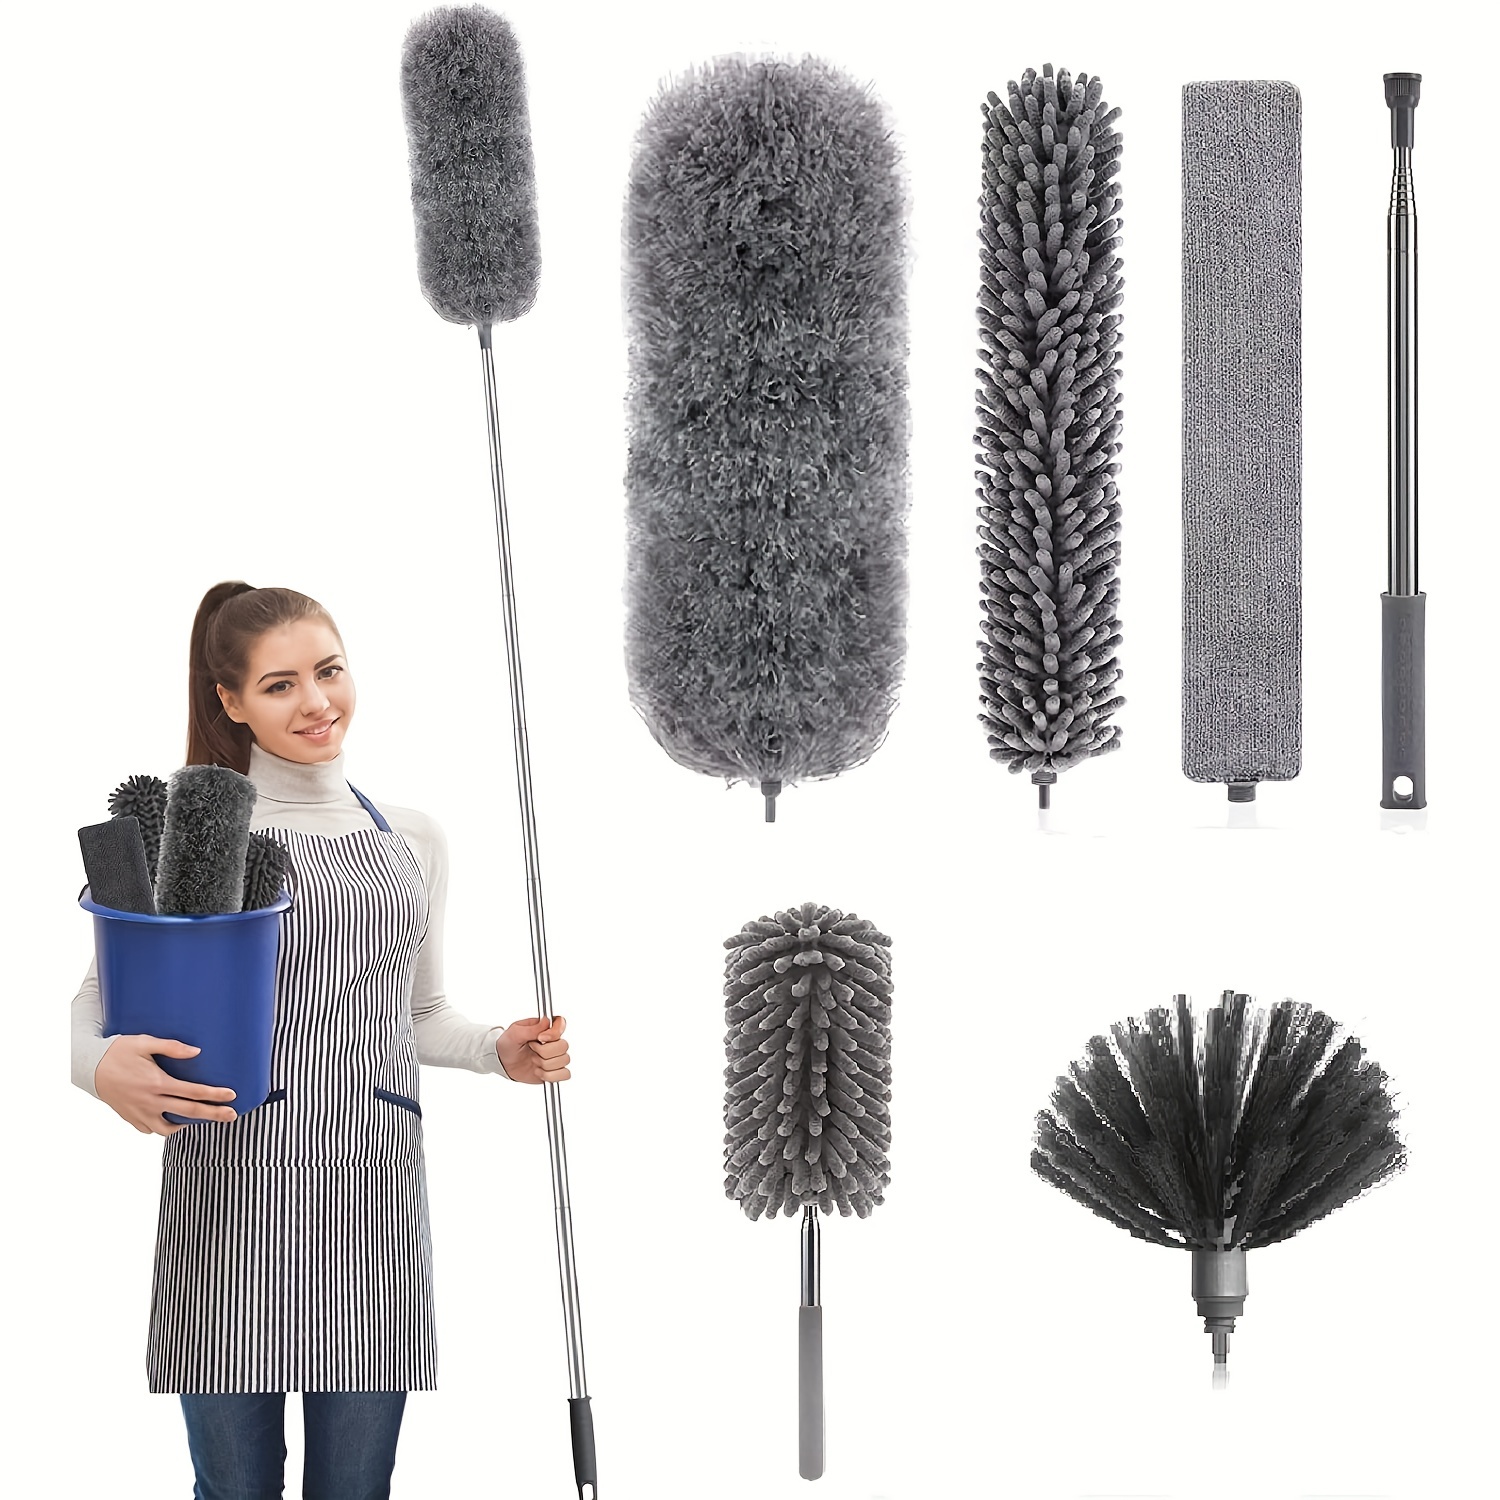 

Microfiber Feather Duster 4pcs/6pcs/7pcs - Extendable & Bendable Dusters With Long Extension Pole , Washable Lightweight Dusters For Cleaning Ceiling Fan, High Ceiling, Blinds, Furniture, Cars